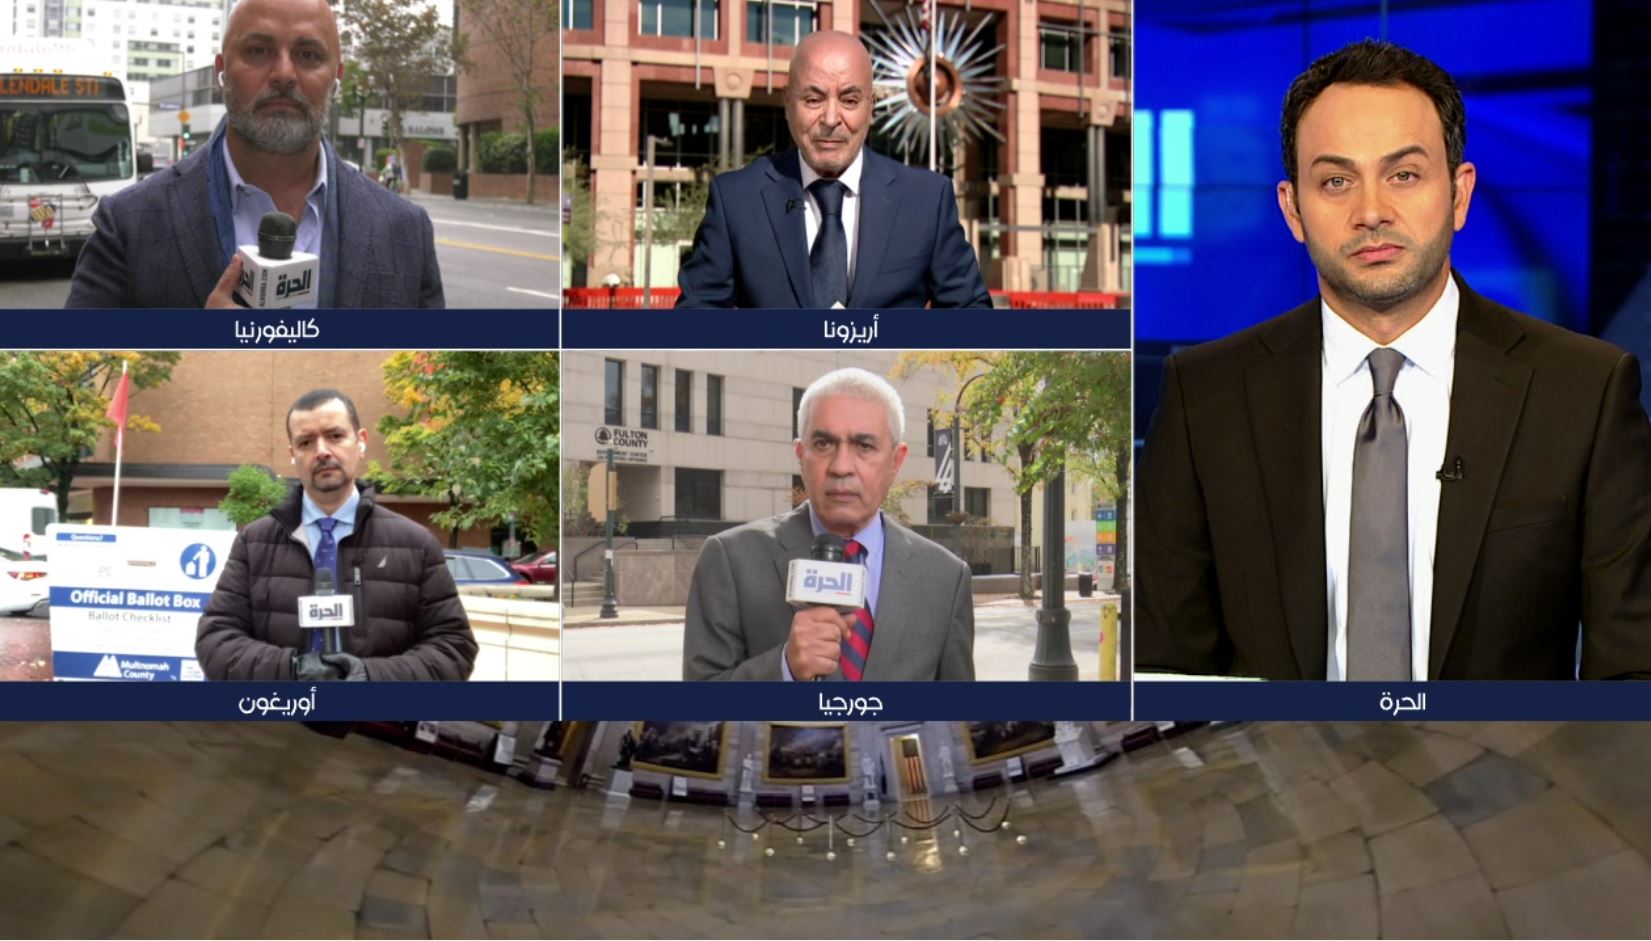 Alhurra provides extensive coverage of the 2022 U.S. Midterm Elections